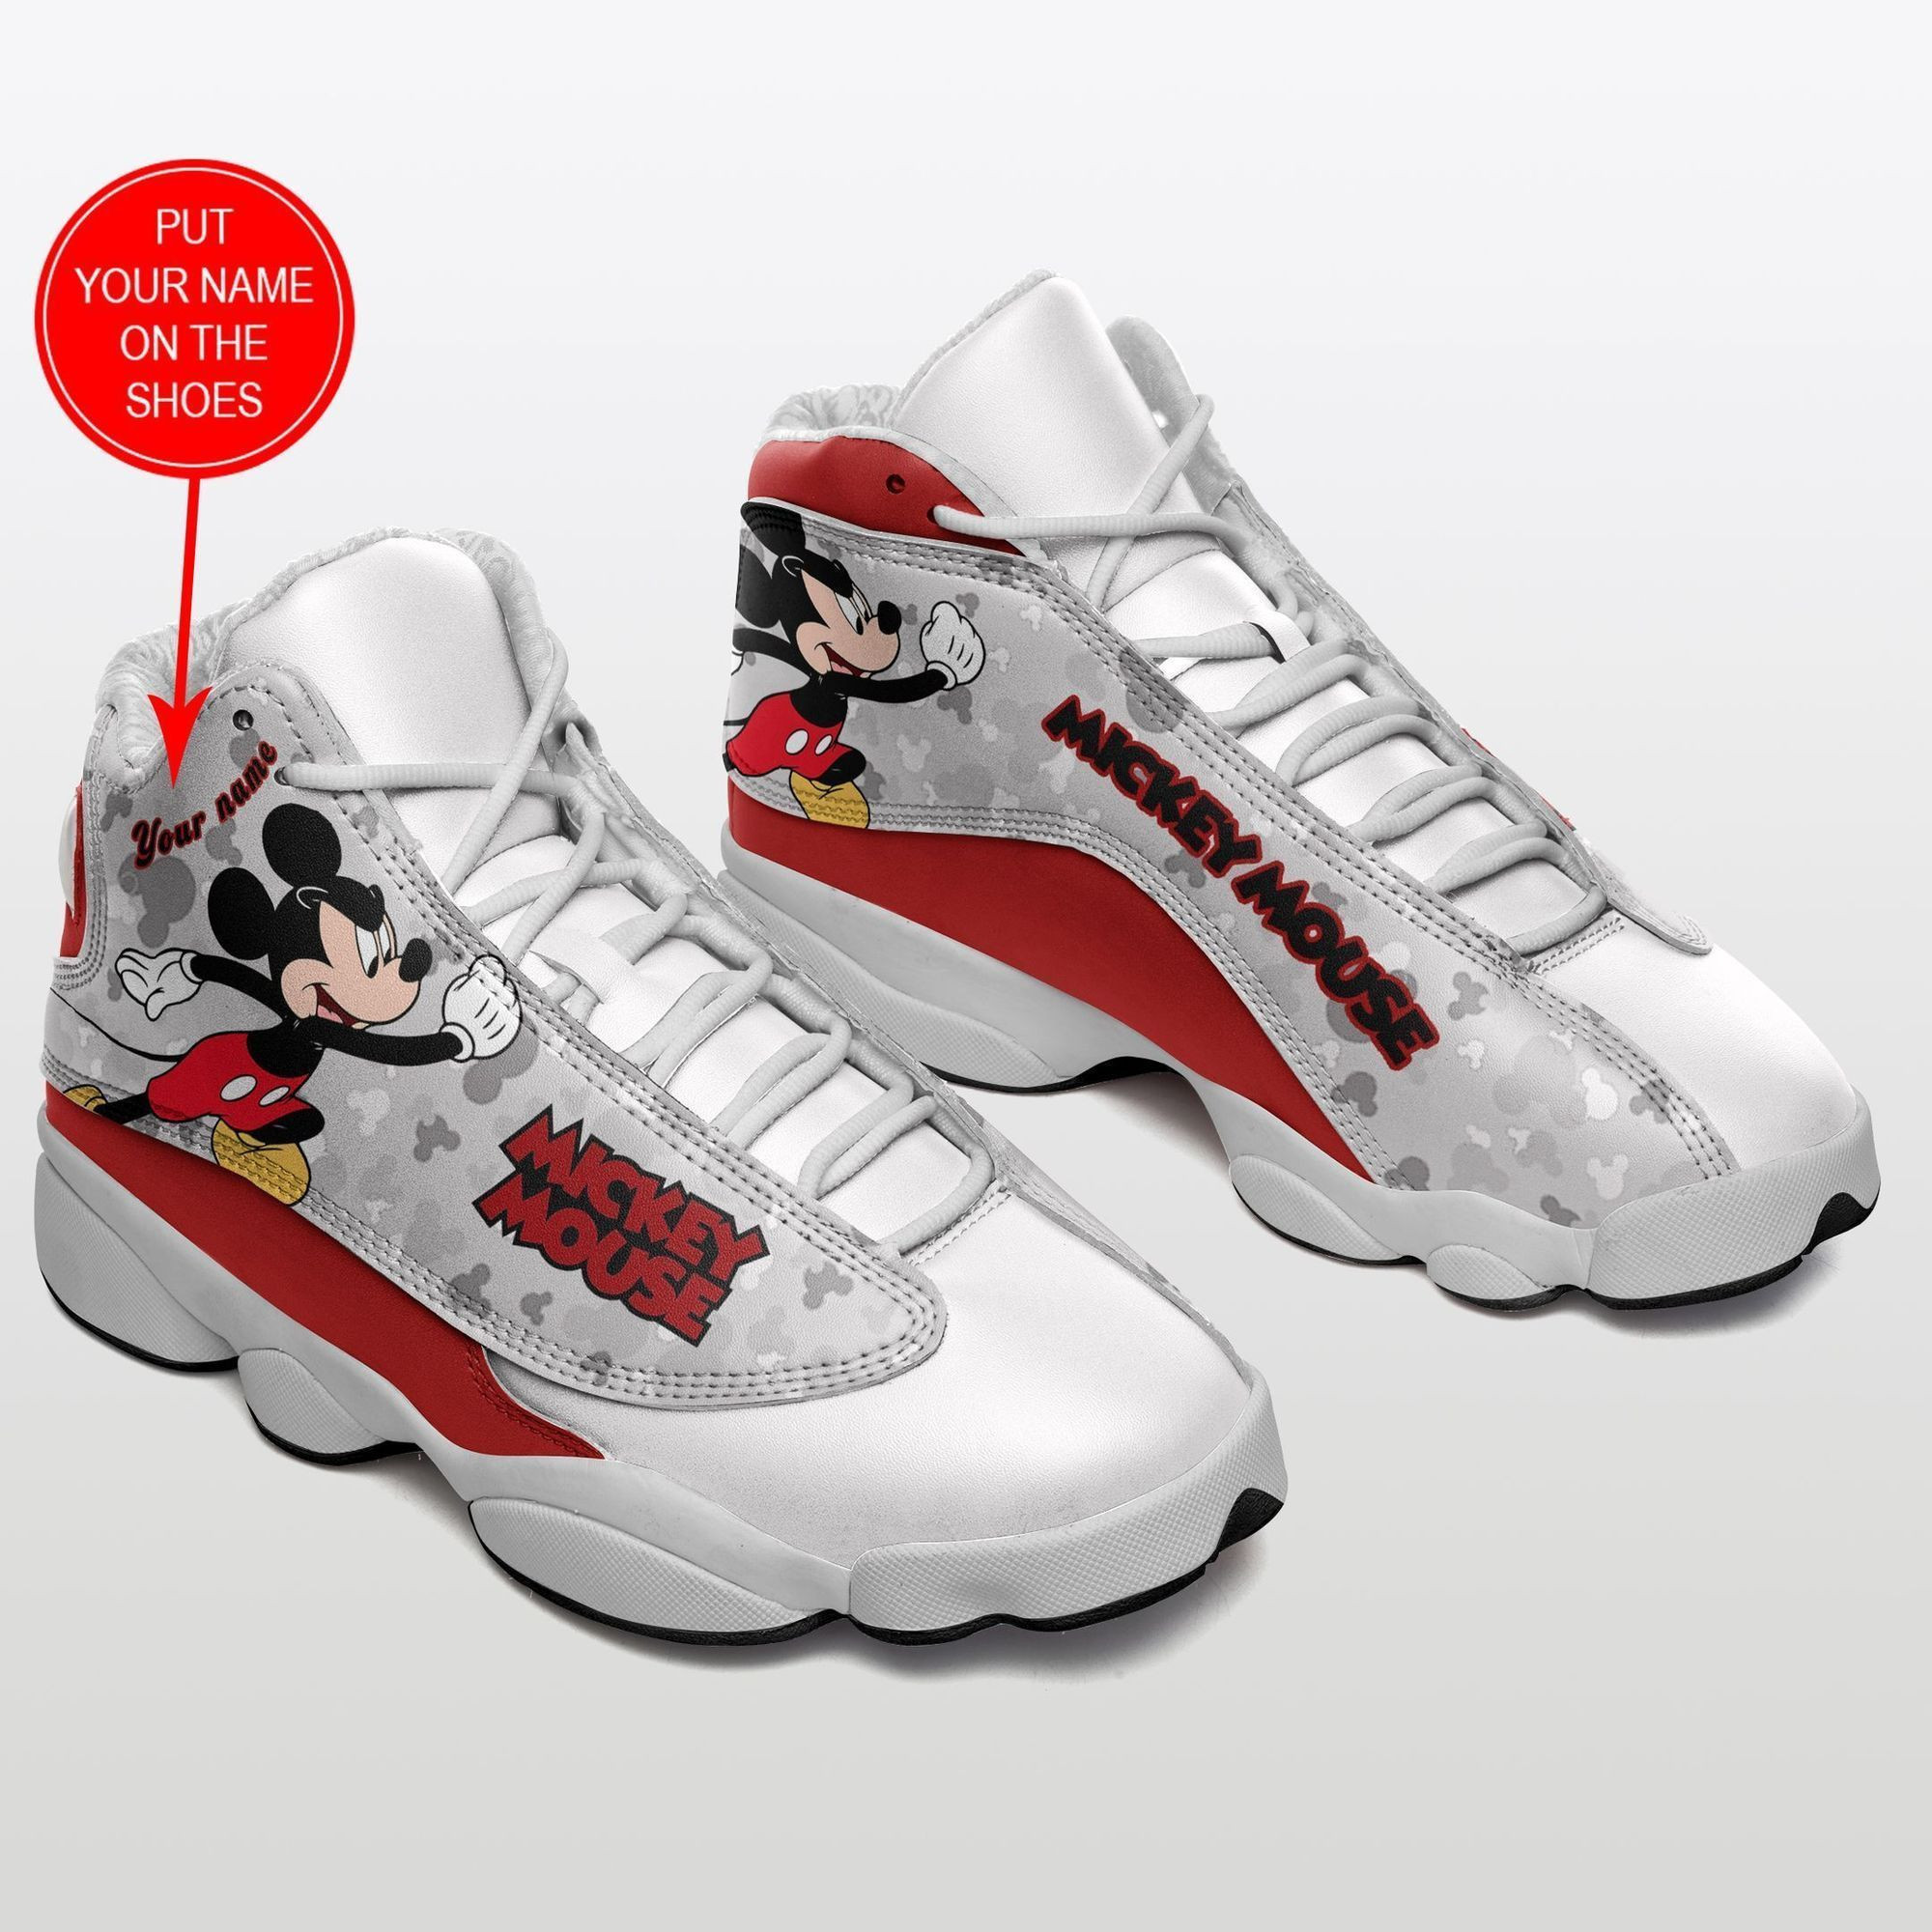 Custom name -disney mickey mouse leather shoes- disney mickey sport shoes- lover gift- printed shoes ver8 air jordan 13 shoes  men and women size  us - women size (us) / 8